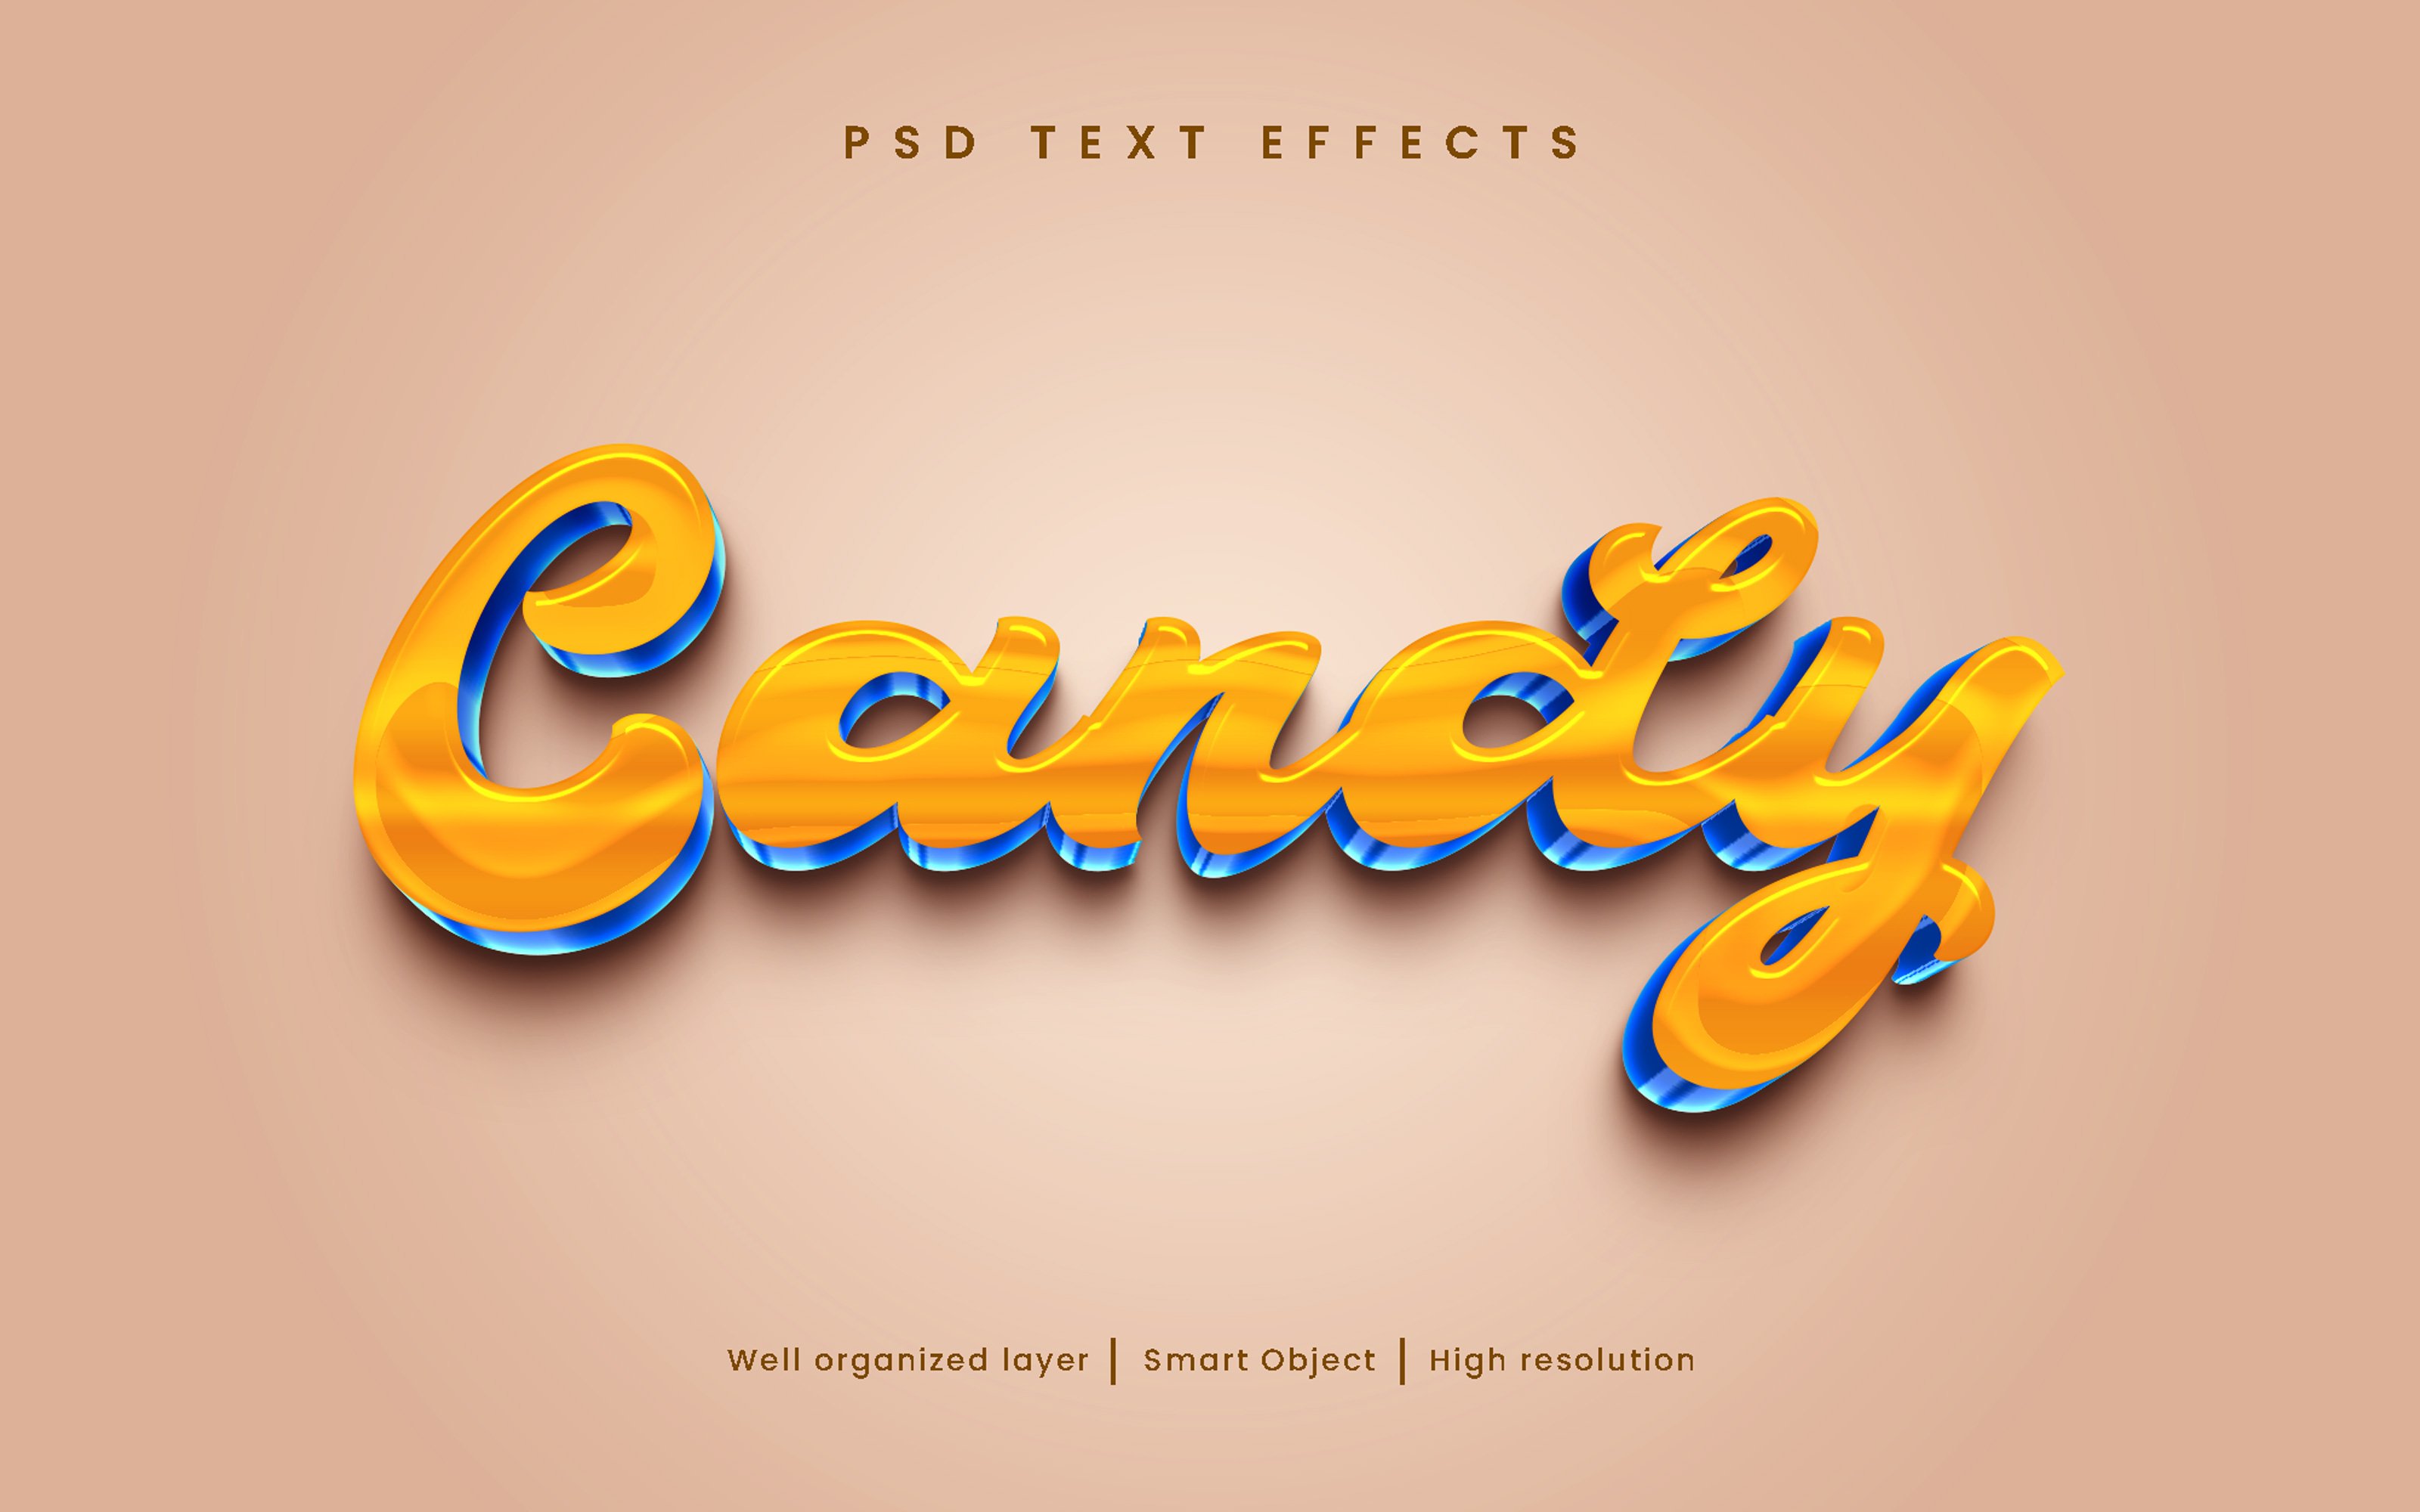 Candy chocolate editable text PSDcover image.